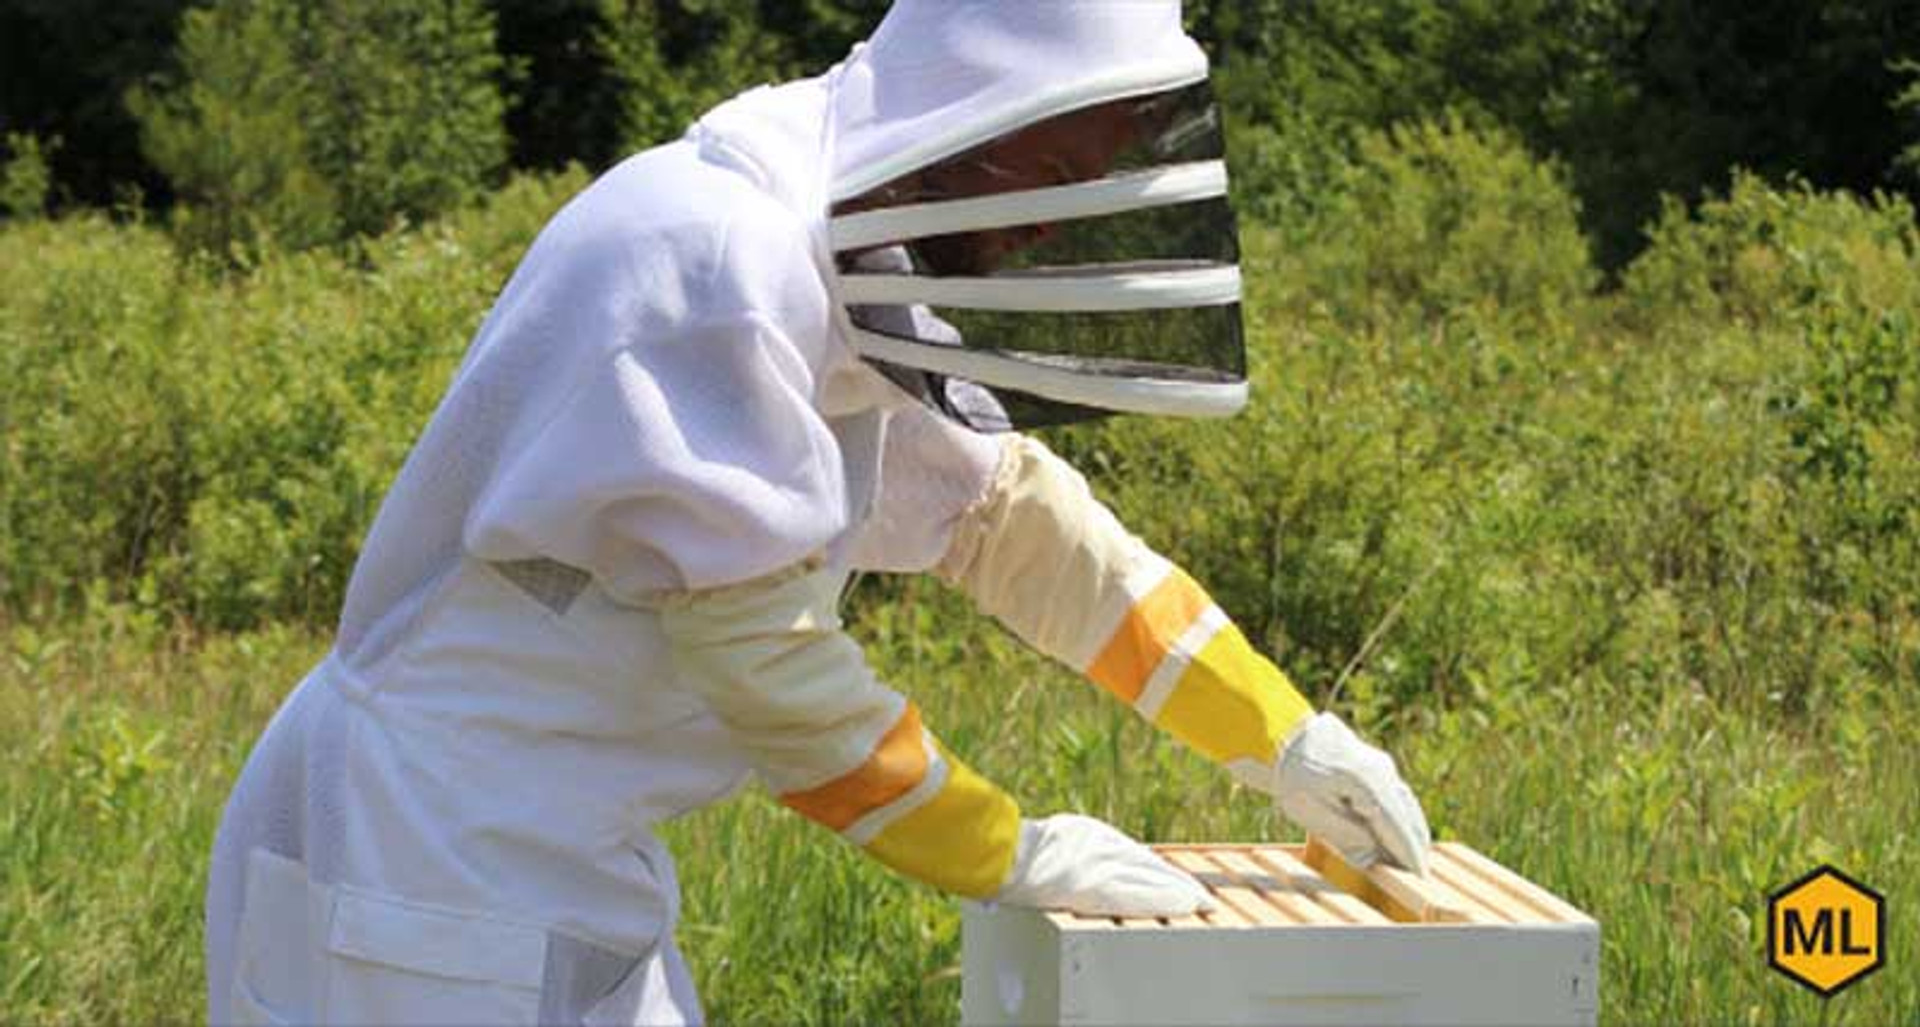 Local beekeeper shares how buying license plates helps honey bees